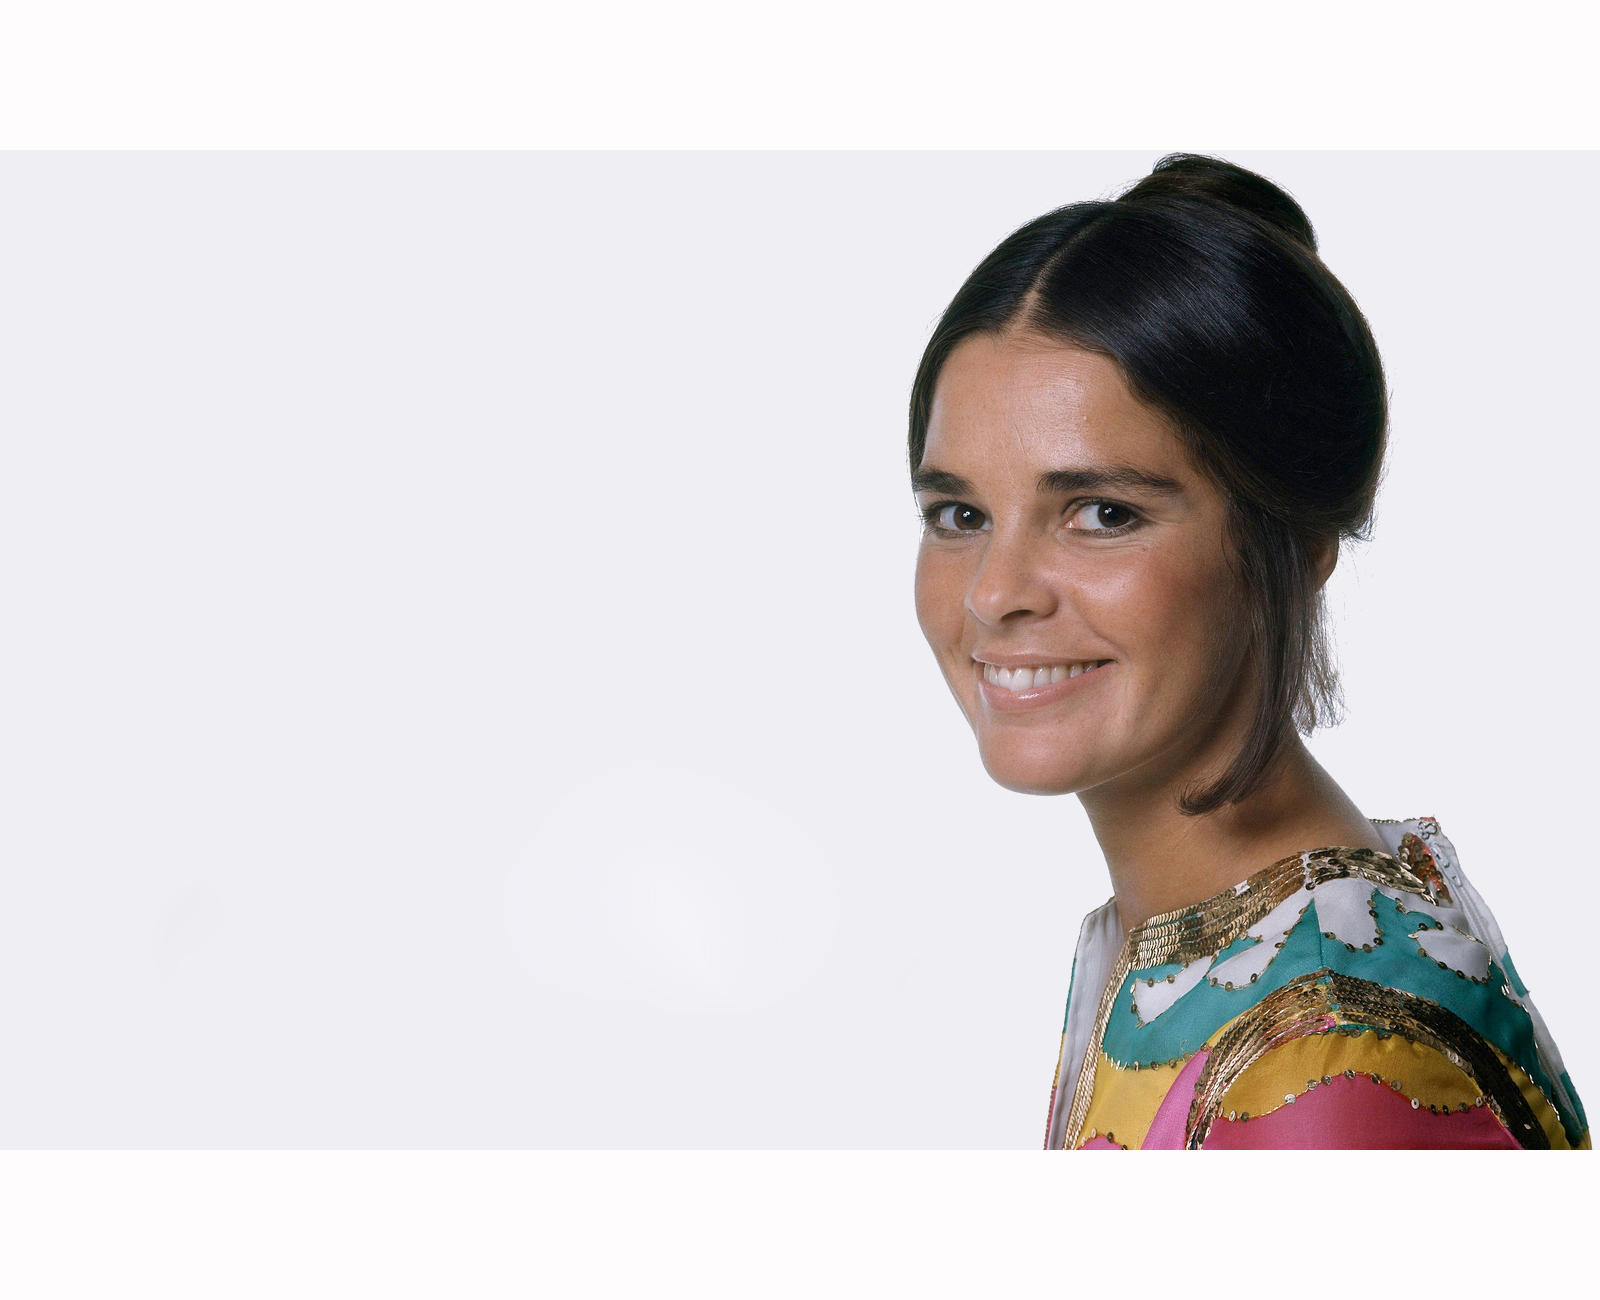 andrew merdoc recommends Is Katie Lee Related To Ali Macgraw